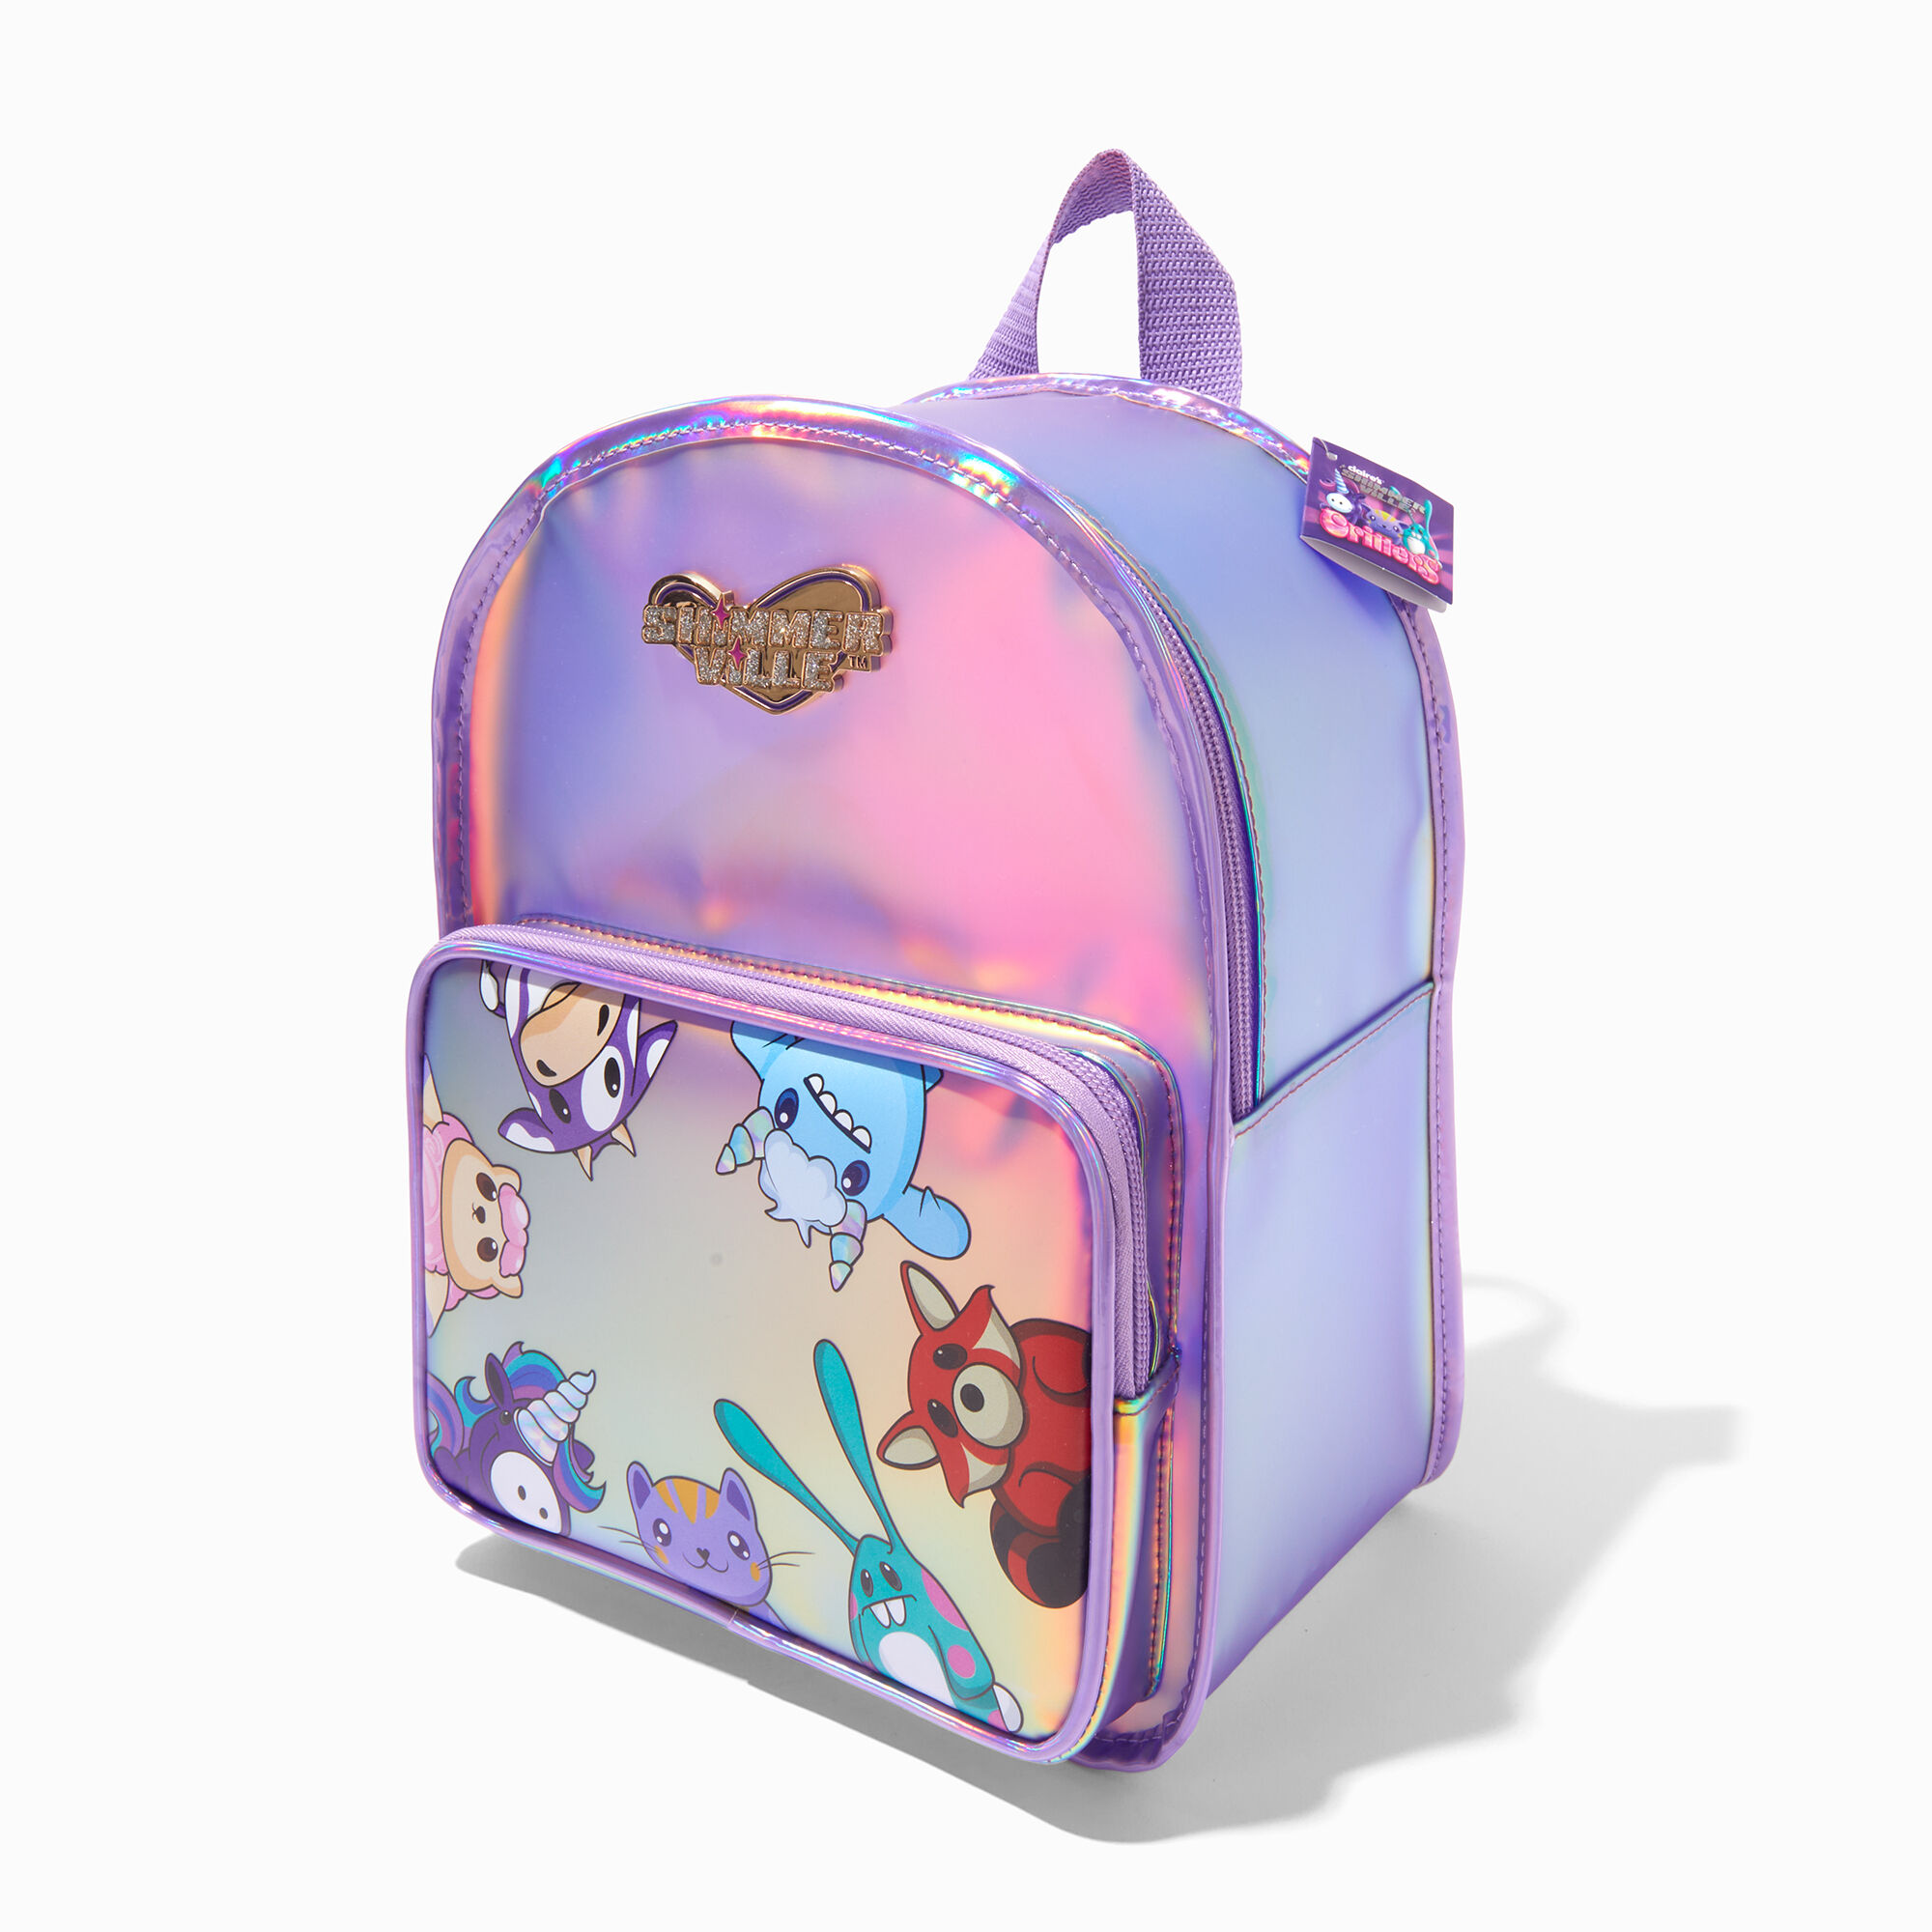 View Claires Shimmerville Critter Mini Backpack information